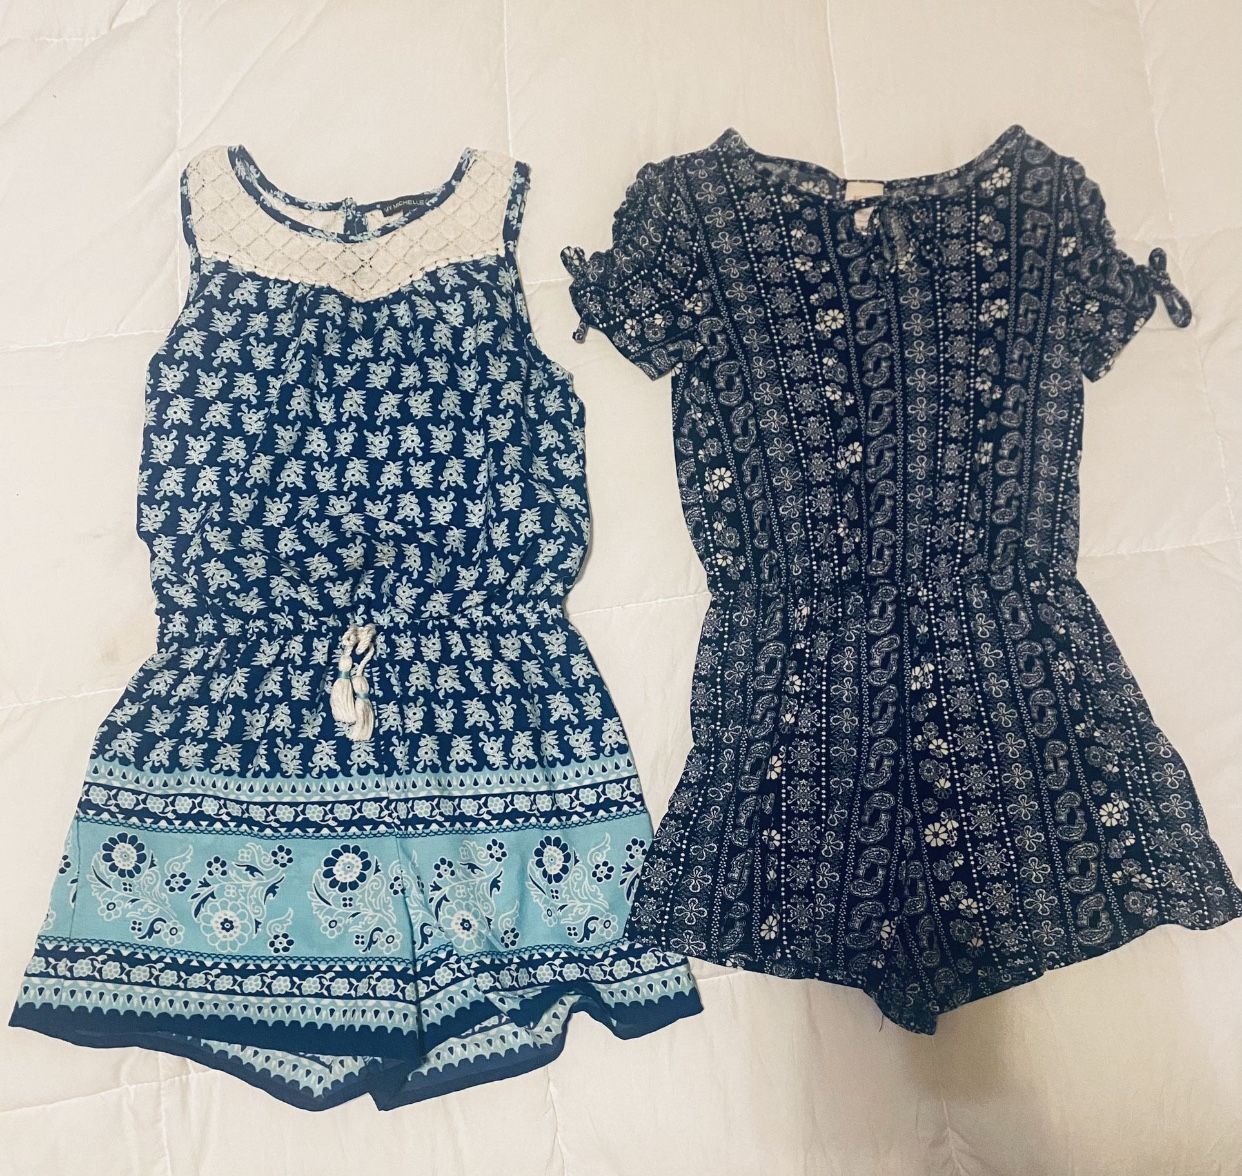 Girls Rompers - Size 12 (Large)